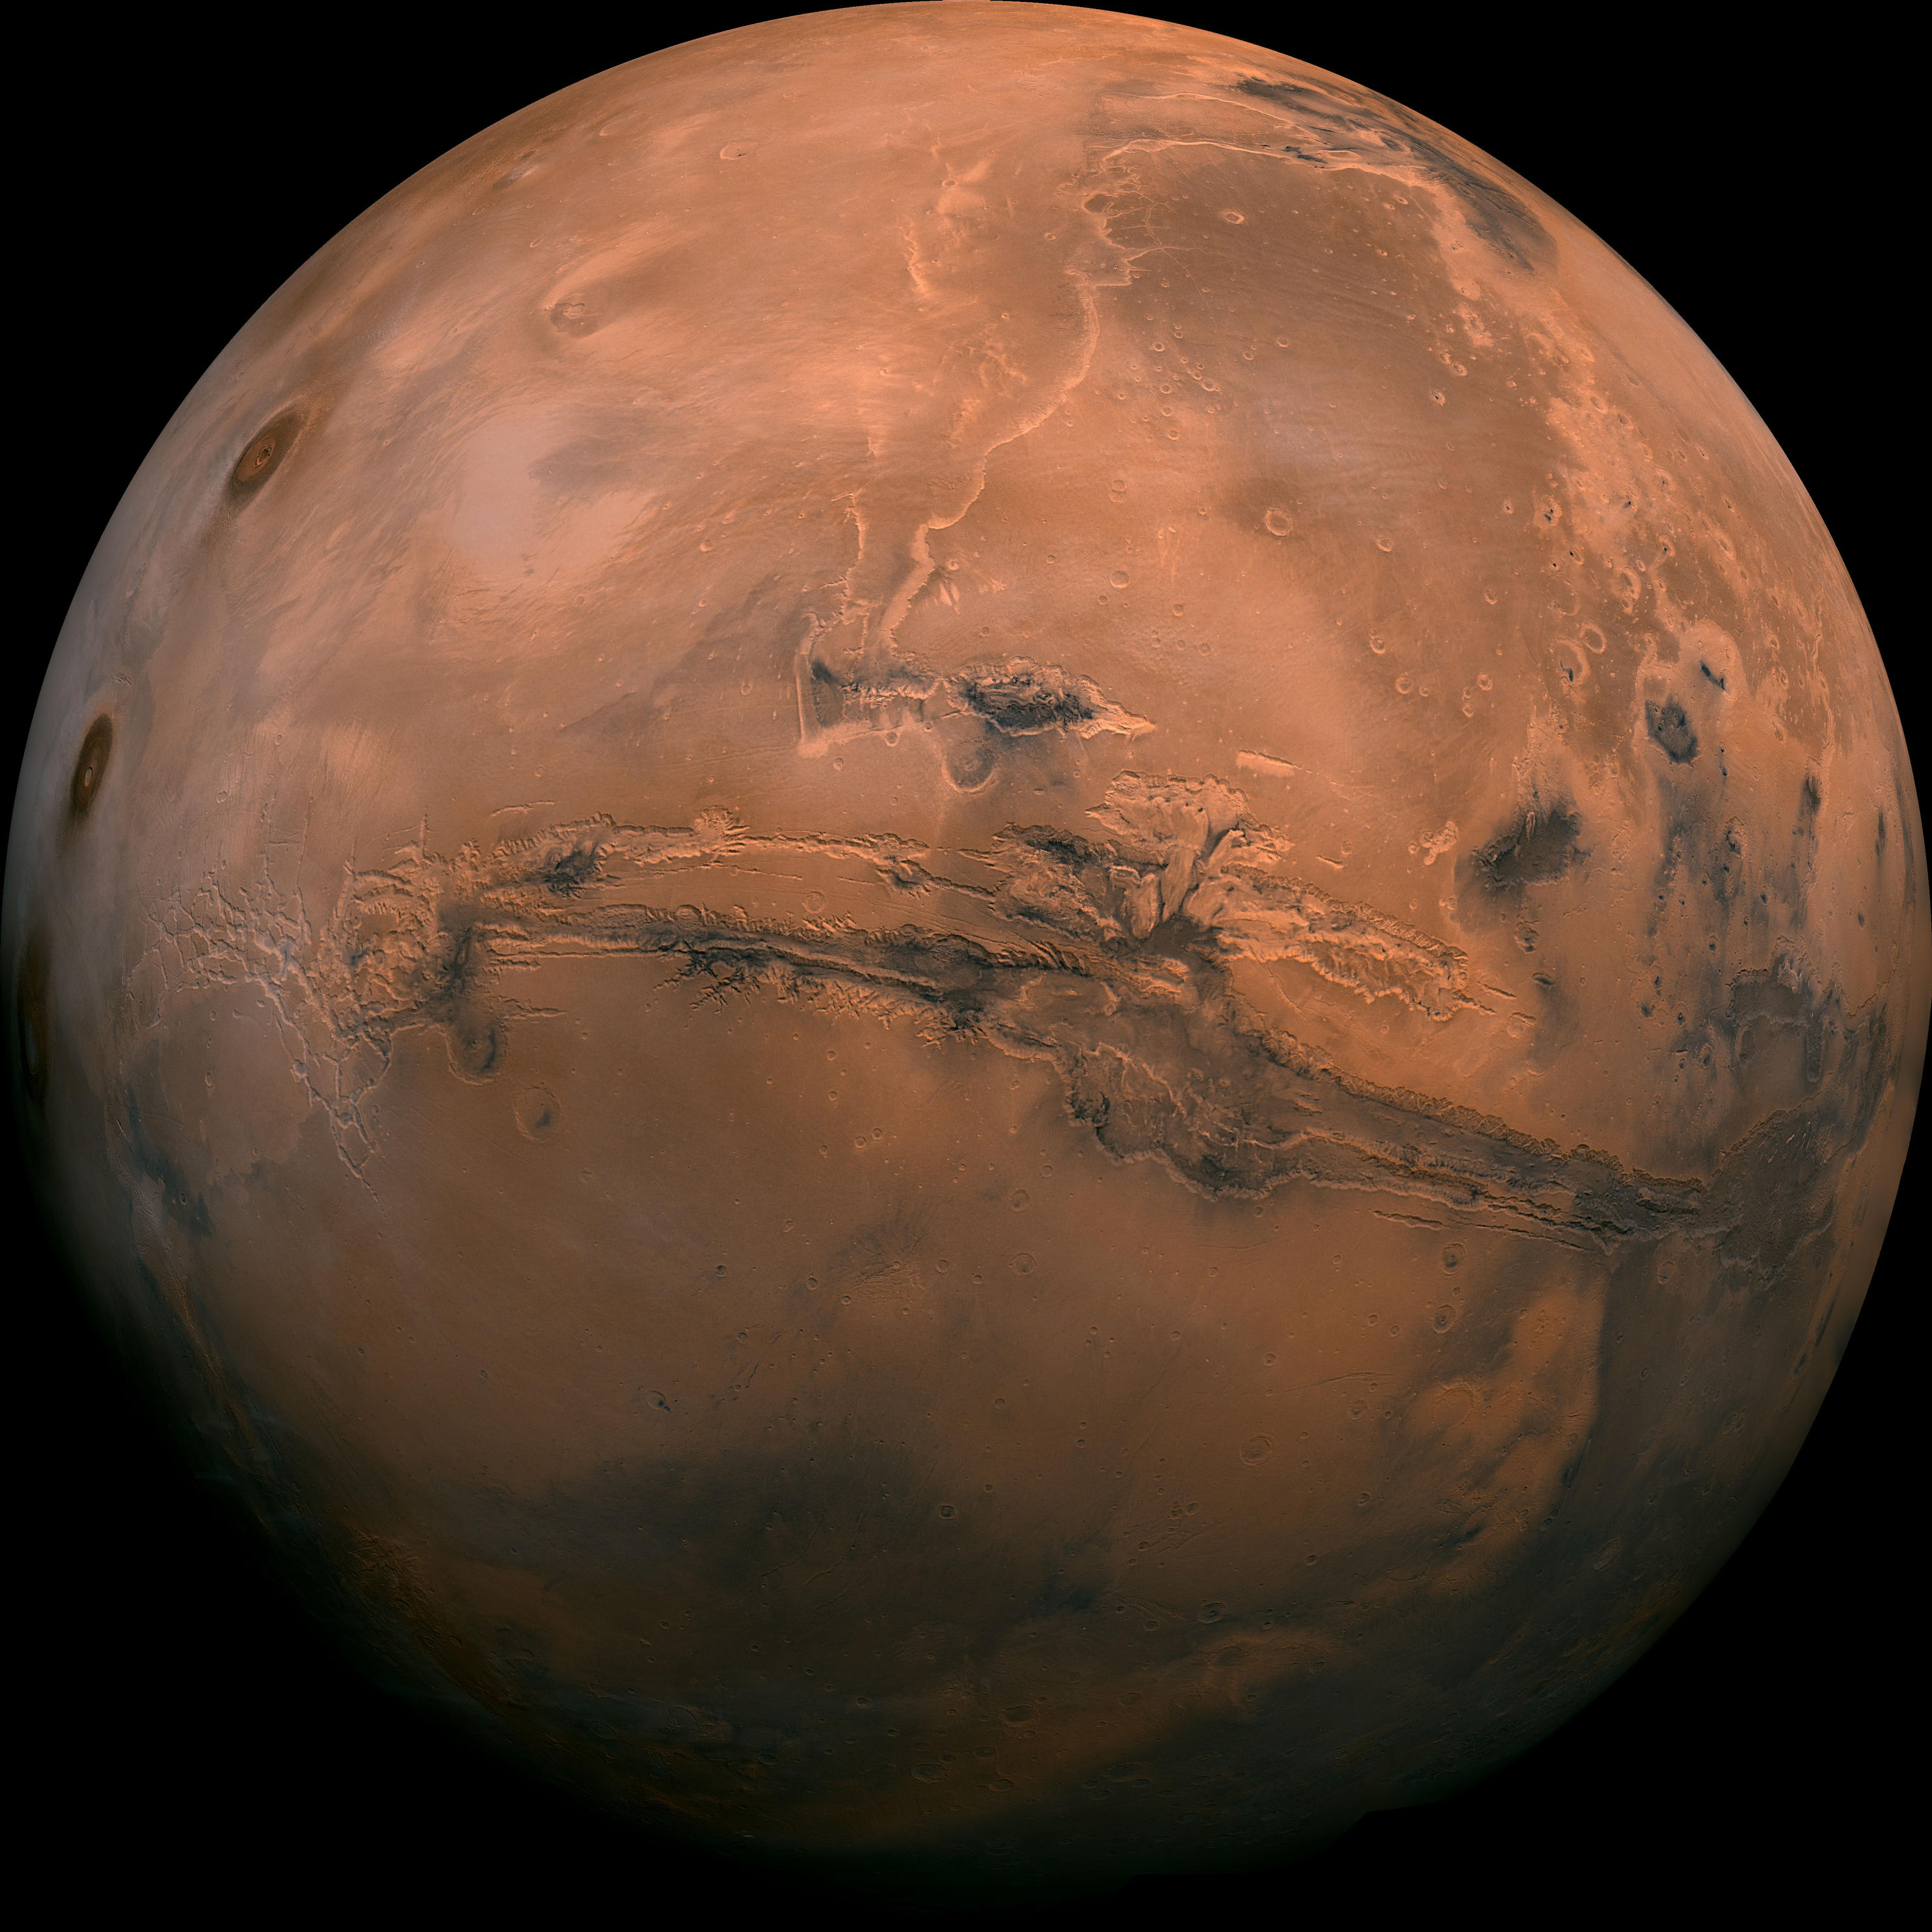 A full globe view of reddish Mars with brown gashes, craters, and canyons.